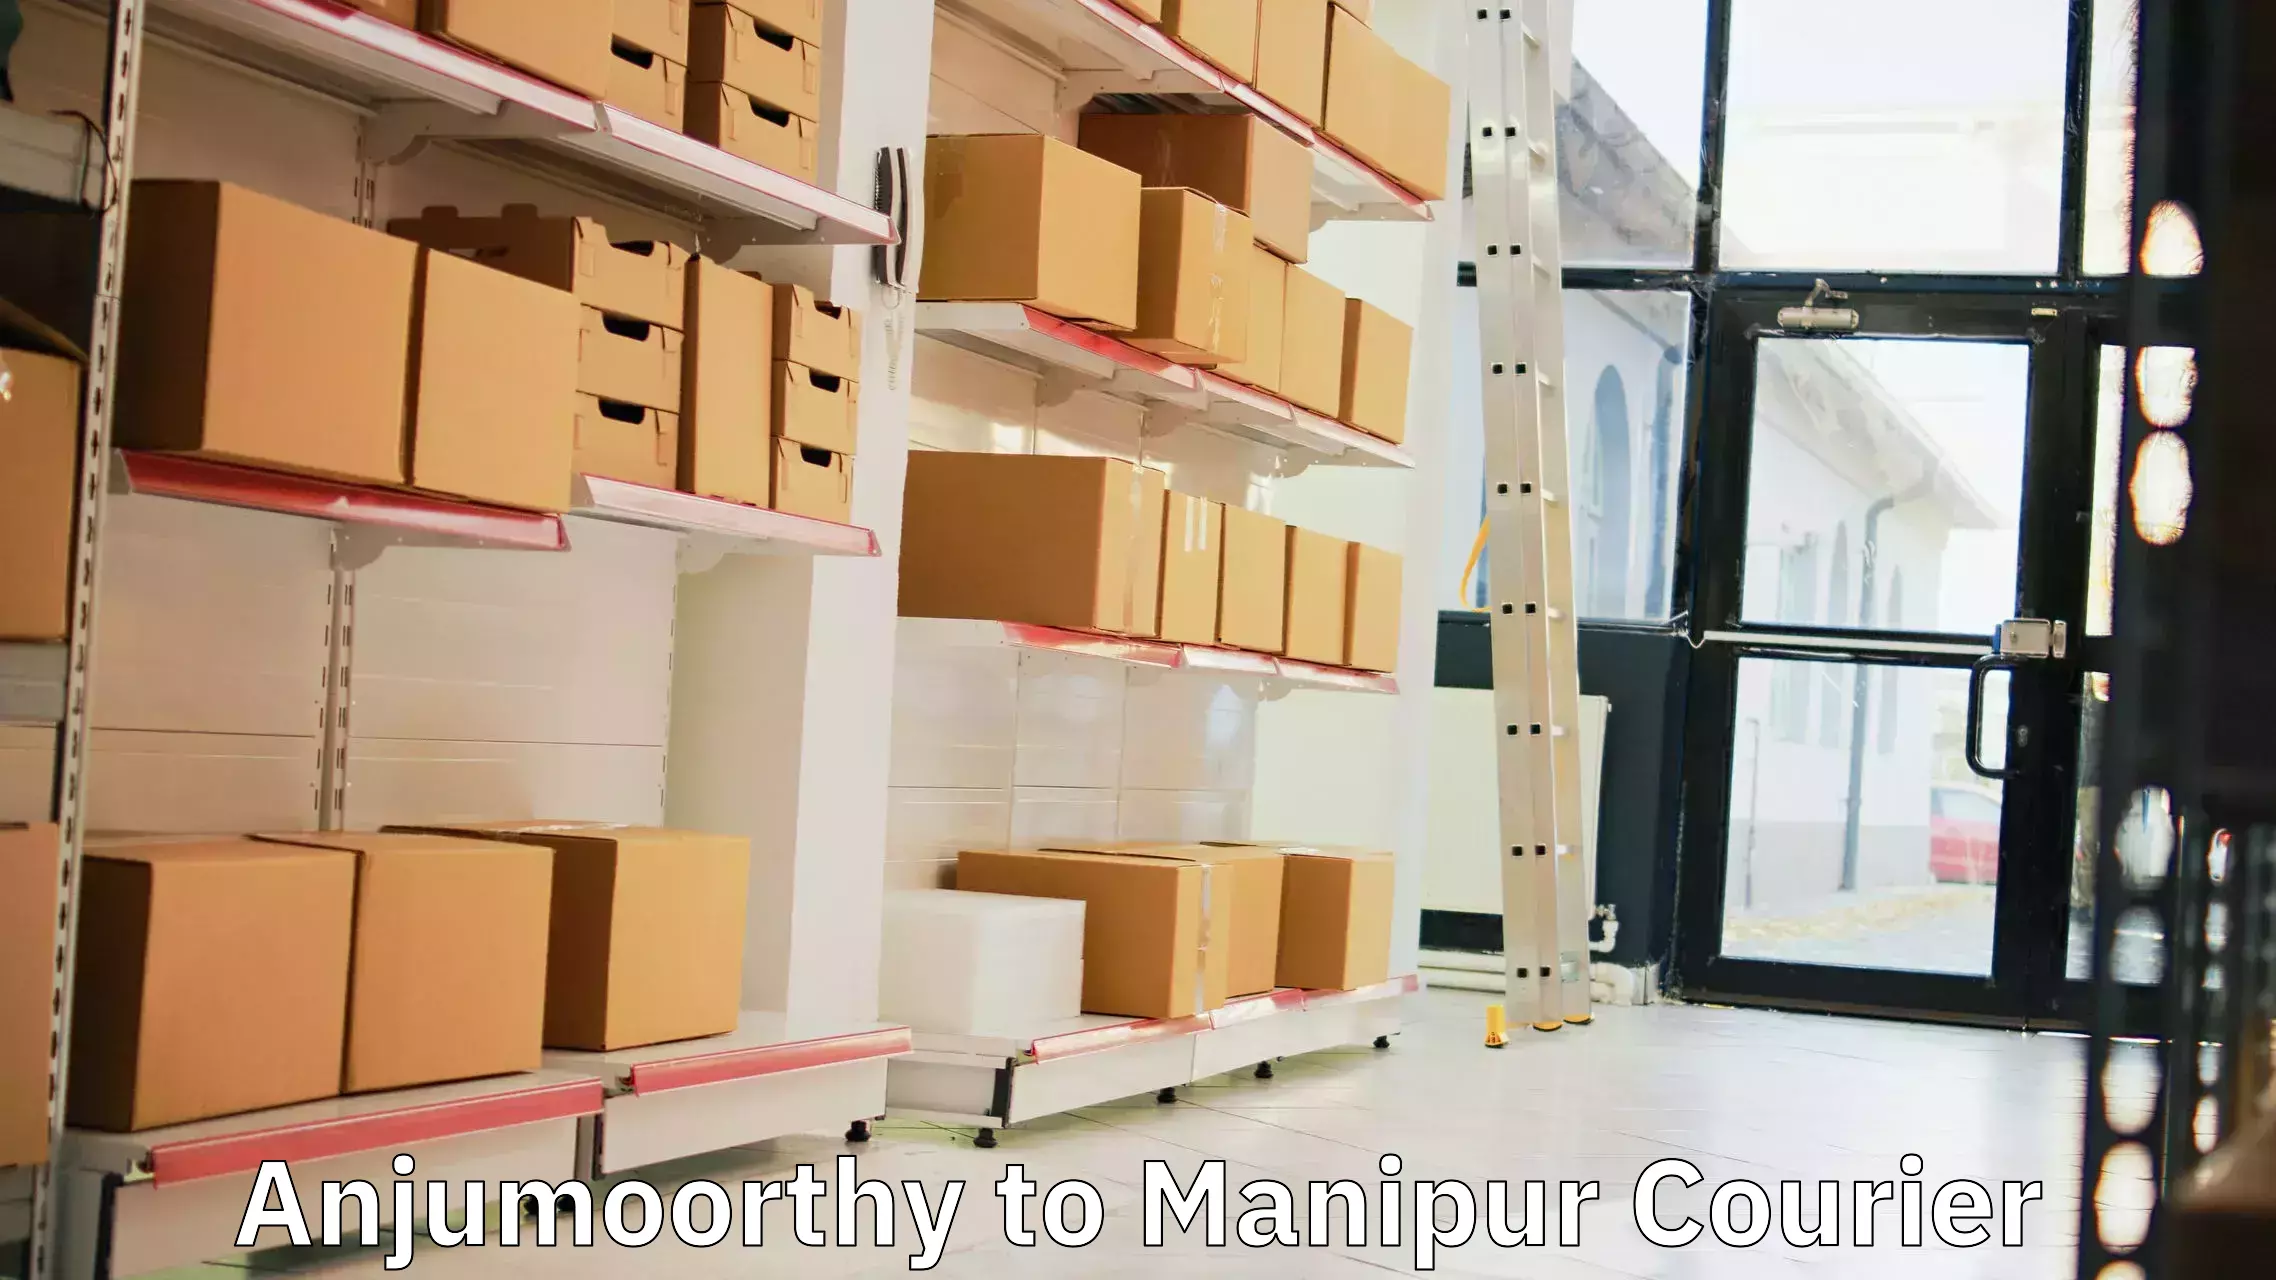 Multi-service courier options Anjumoorthy to Manipur